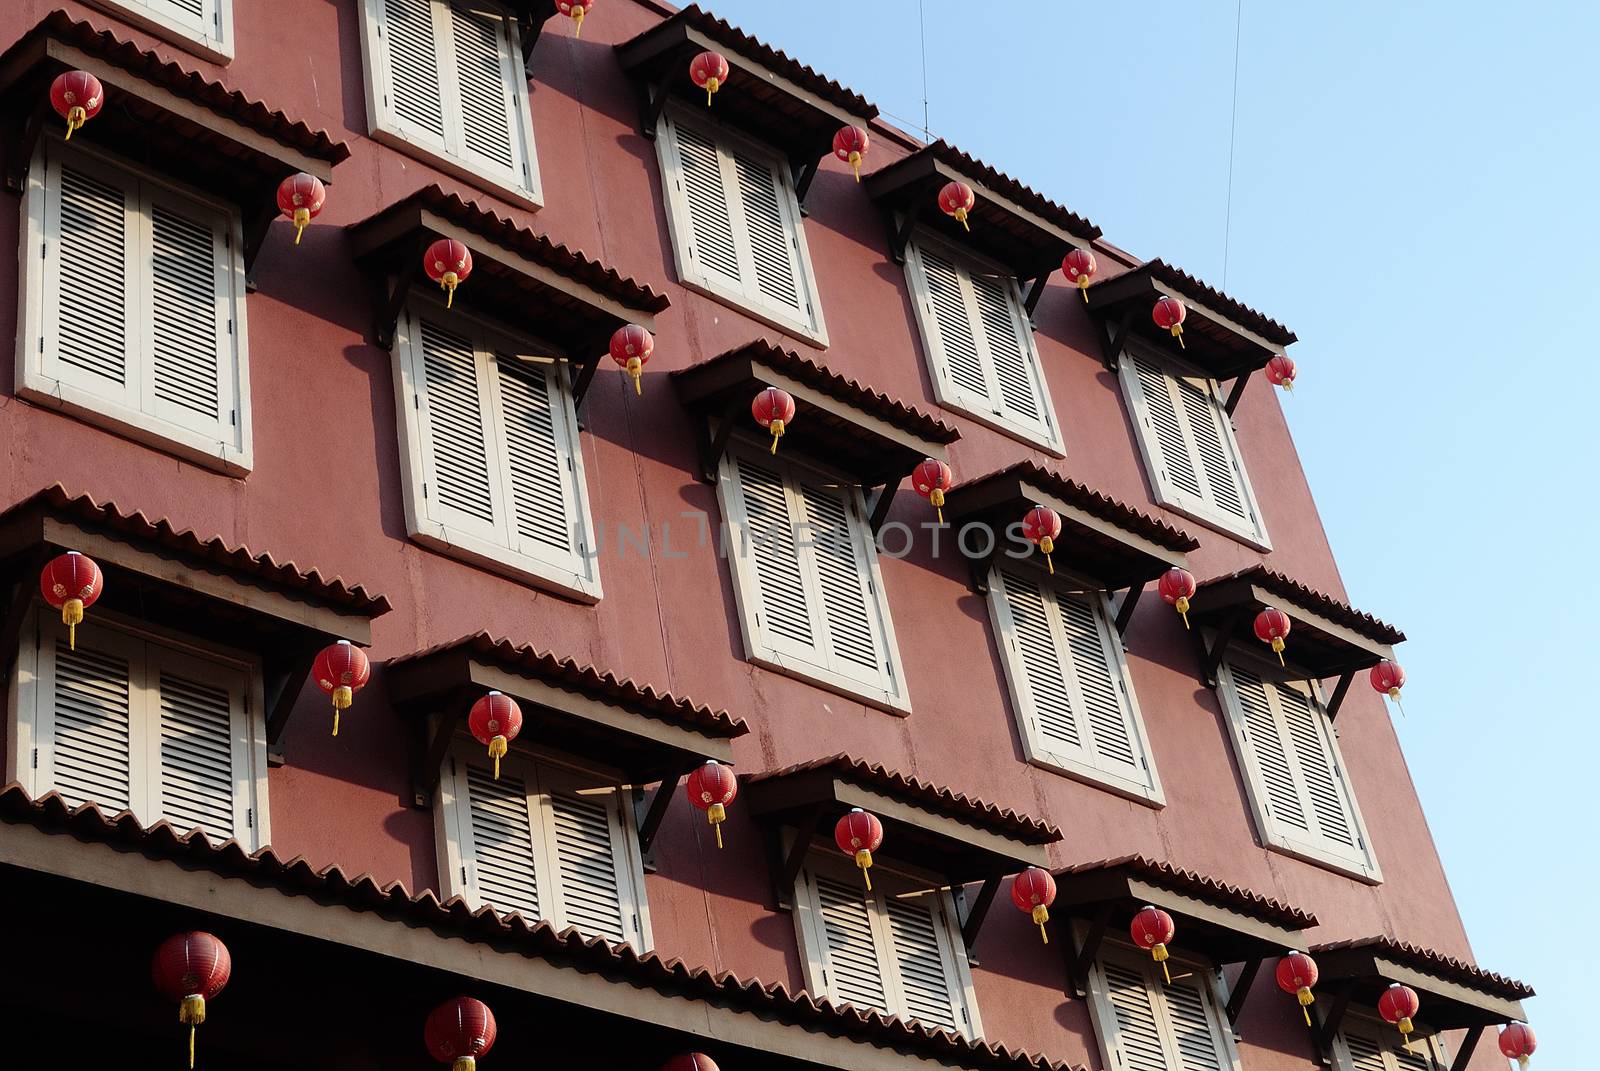 highly decorated shophouse fronts, Malacca, Malaysia